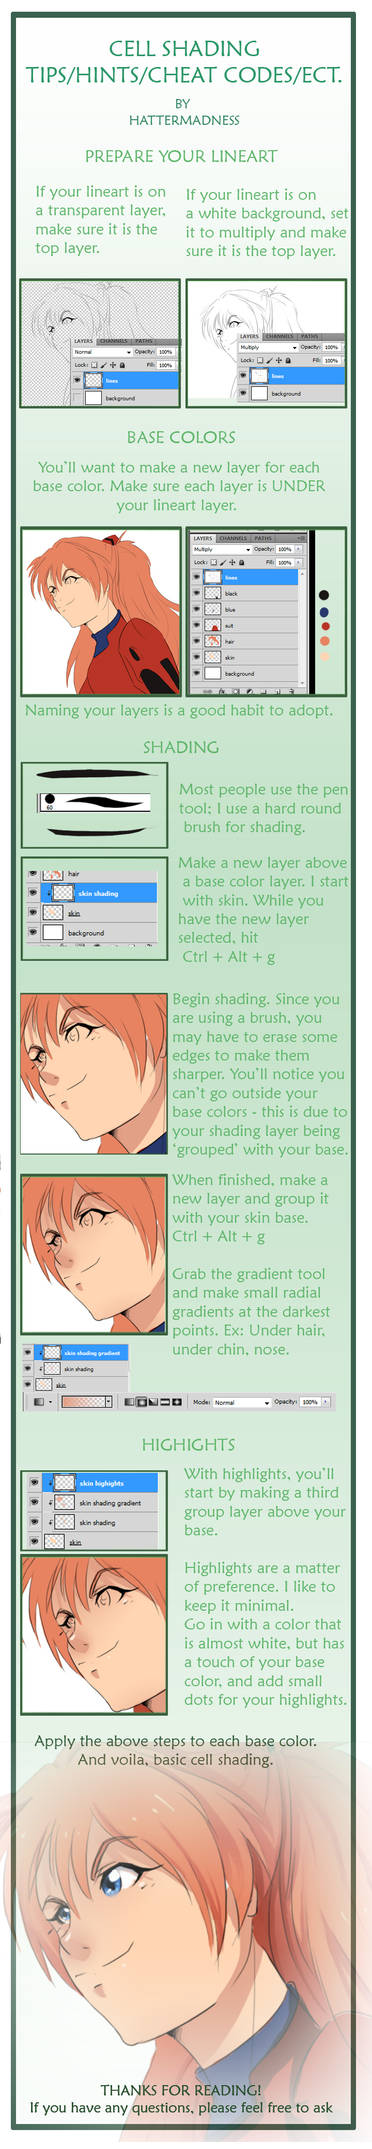 Cell Shading Tutorial